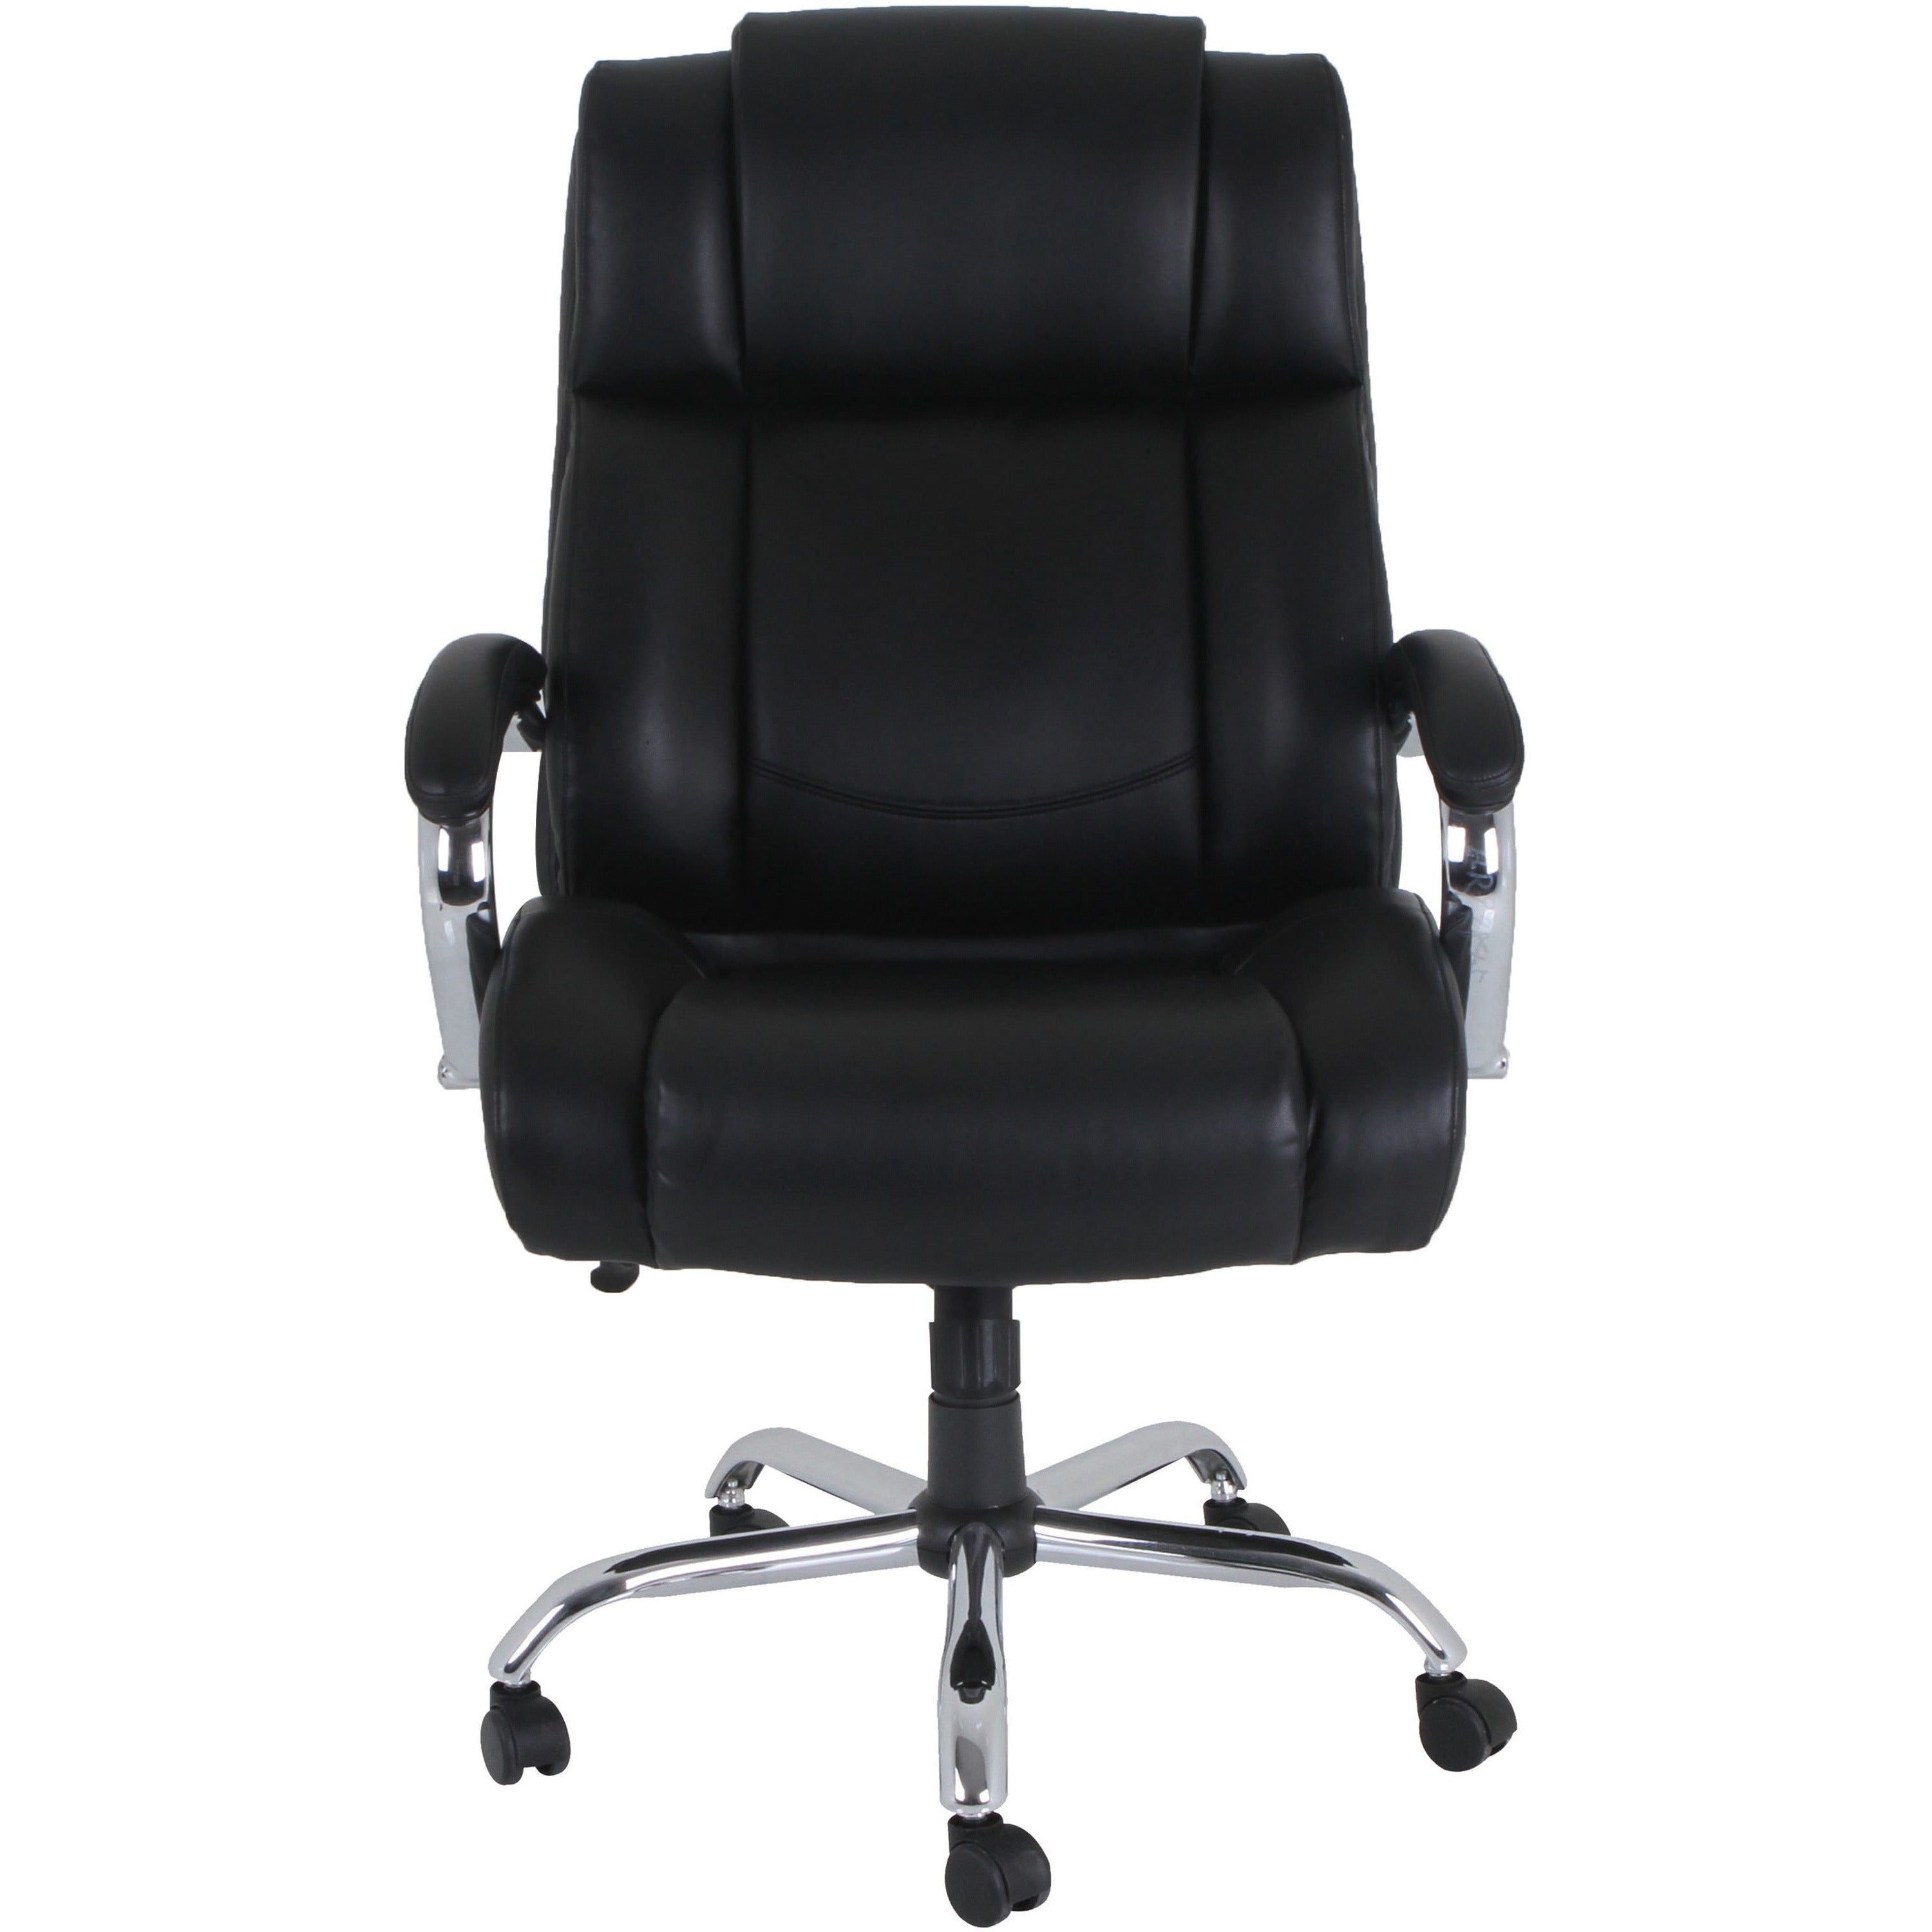 lorell-big-&-tall-chair-with-ultracoil-comfort-black-1-each_llr99845 - 3